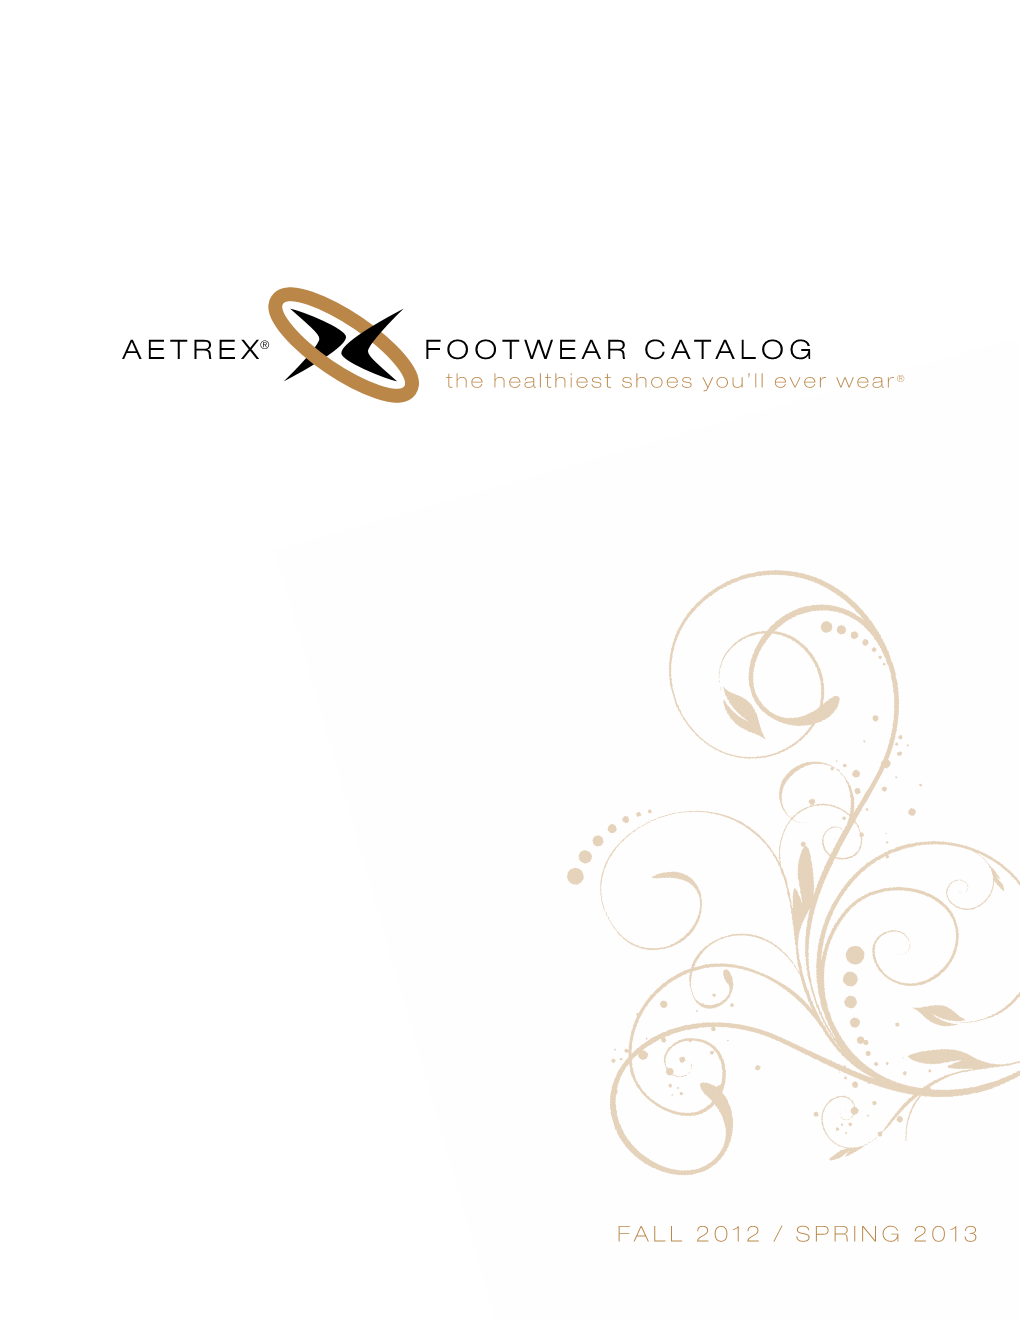 Aetrex® Footwear Catalog the Healthiest Shoes You’Ll Ever Wear®